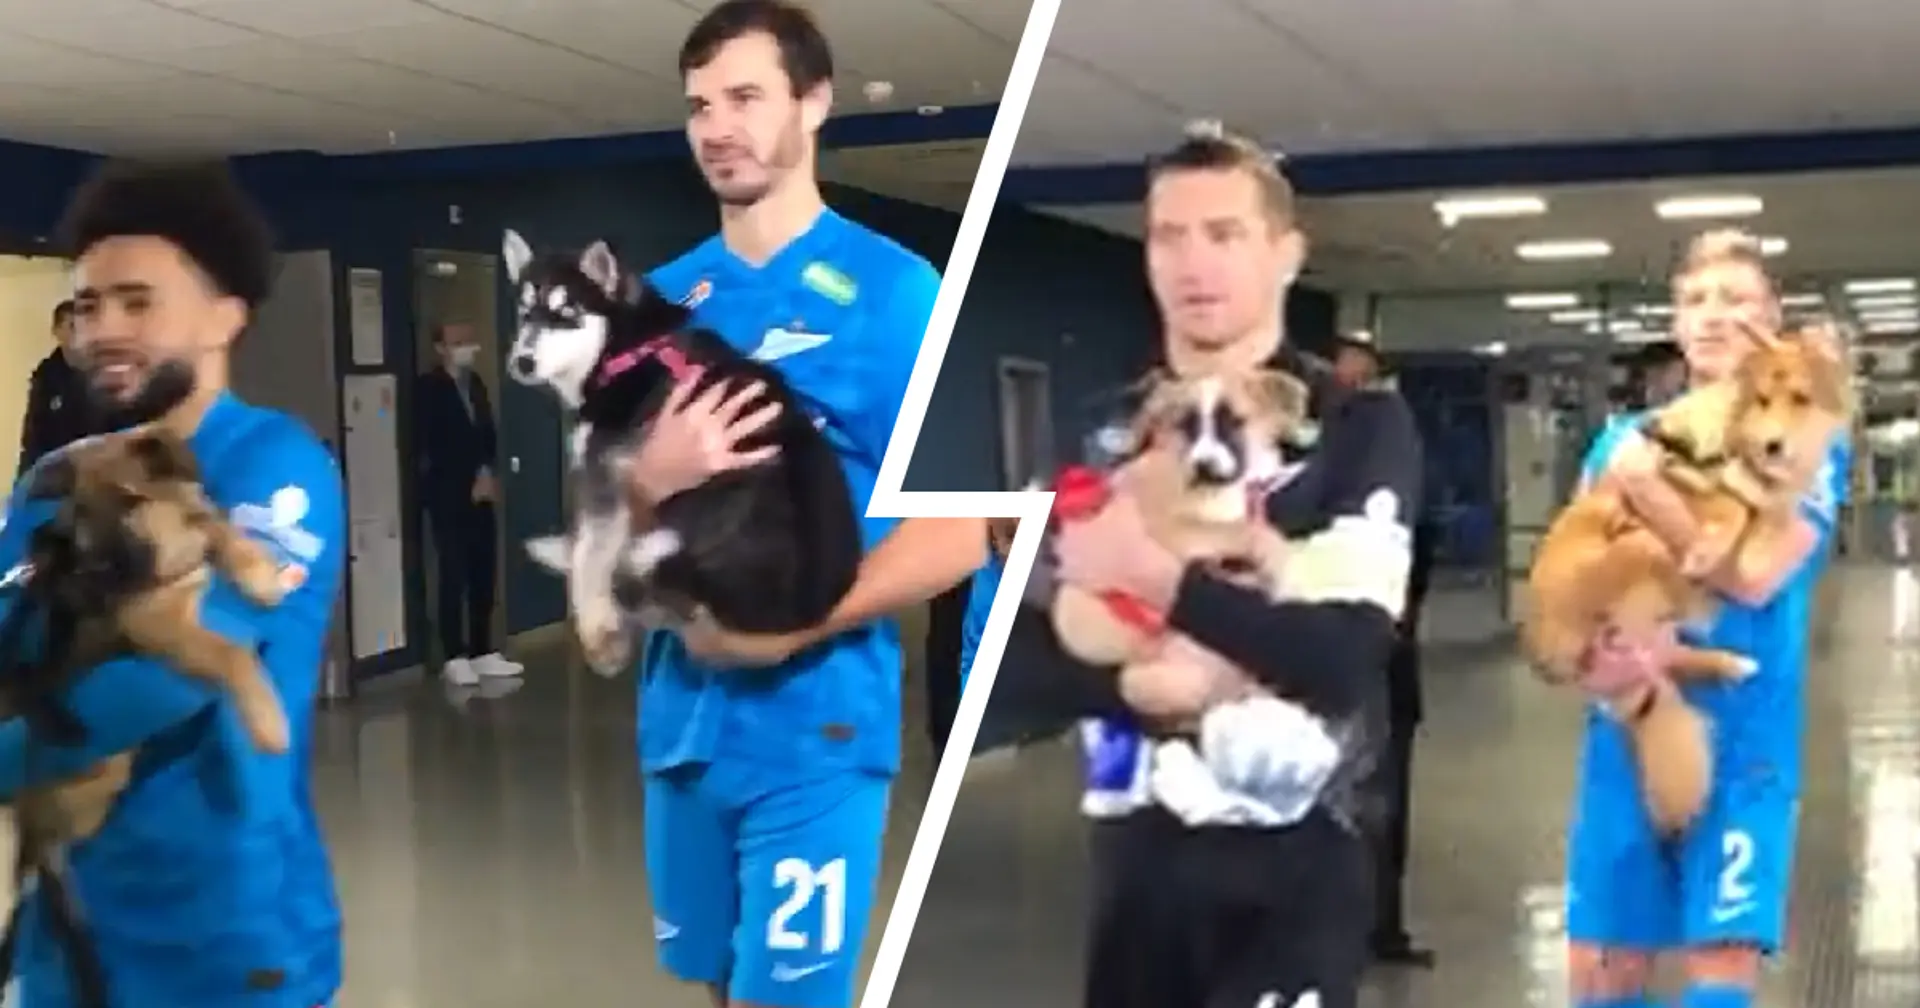 Class from Chelsea's rivals: Zenit players walk on field with shelter dogs to help them find home